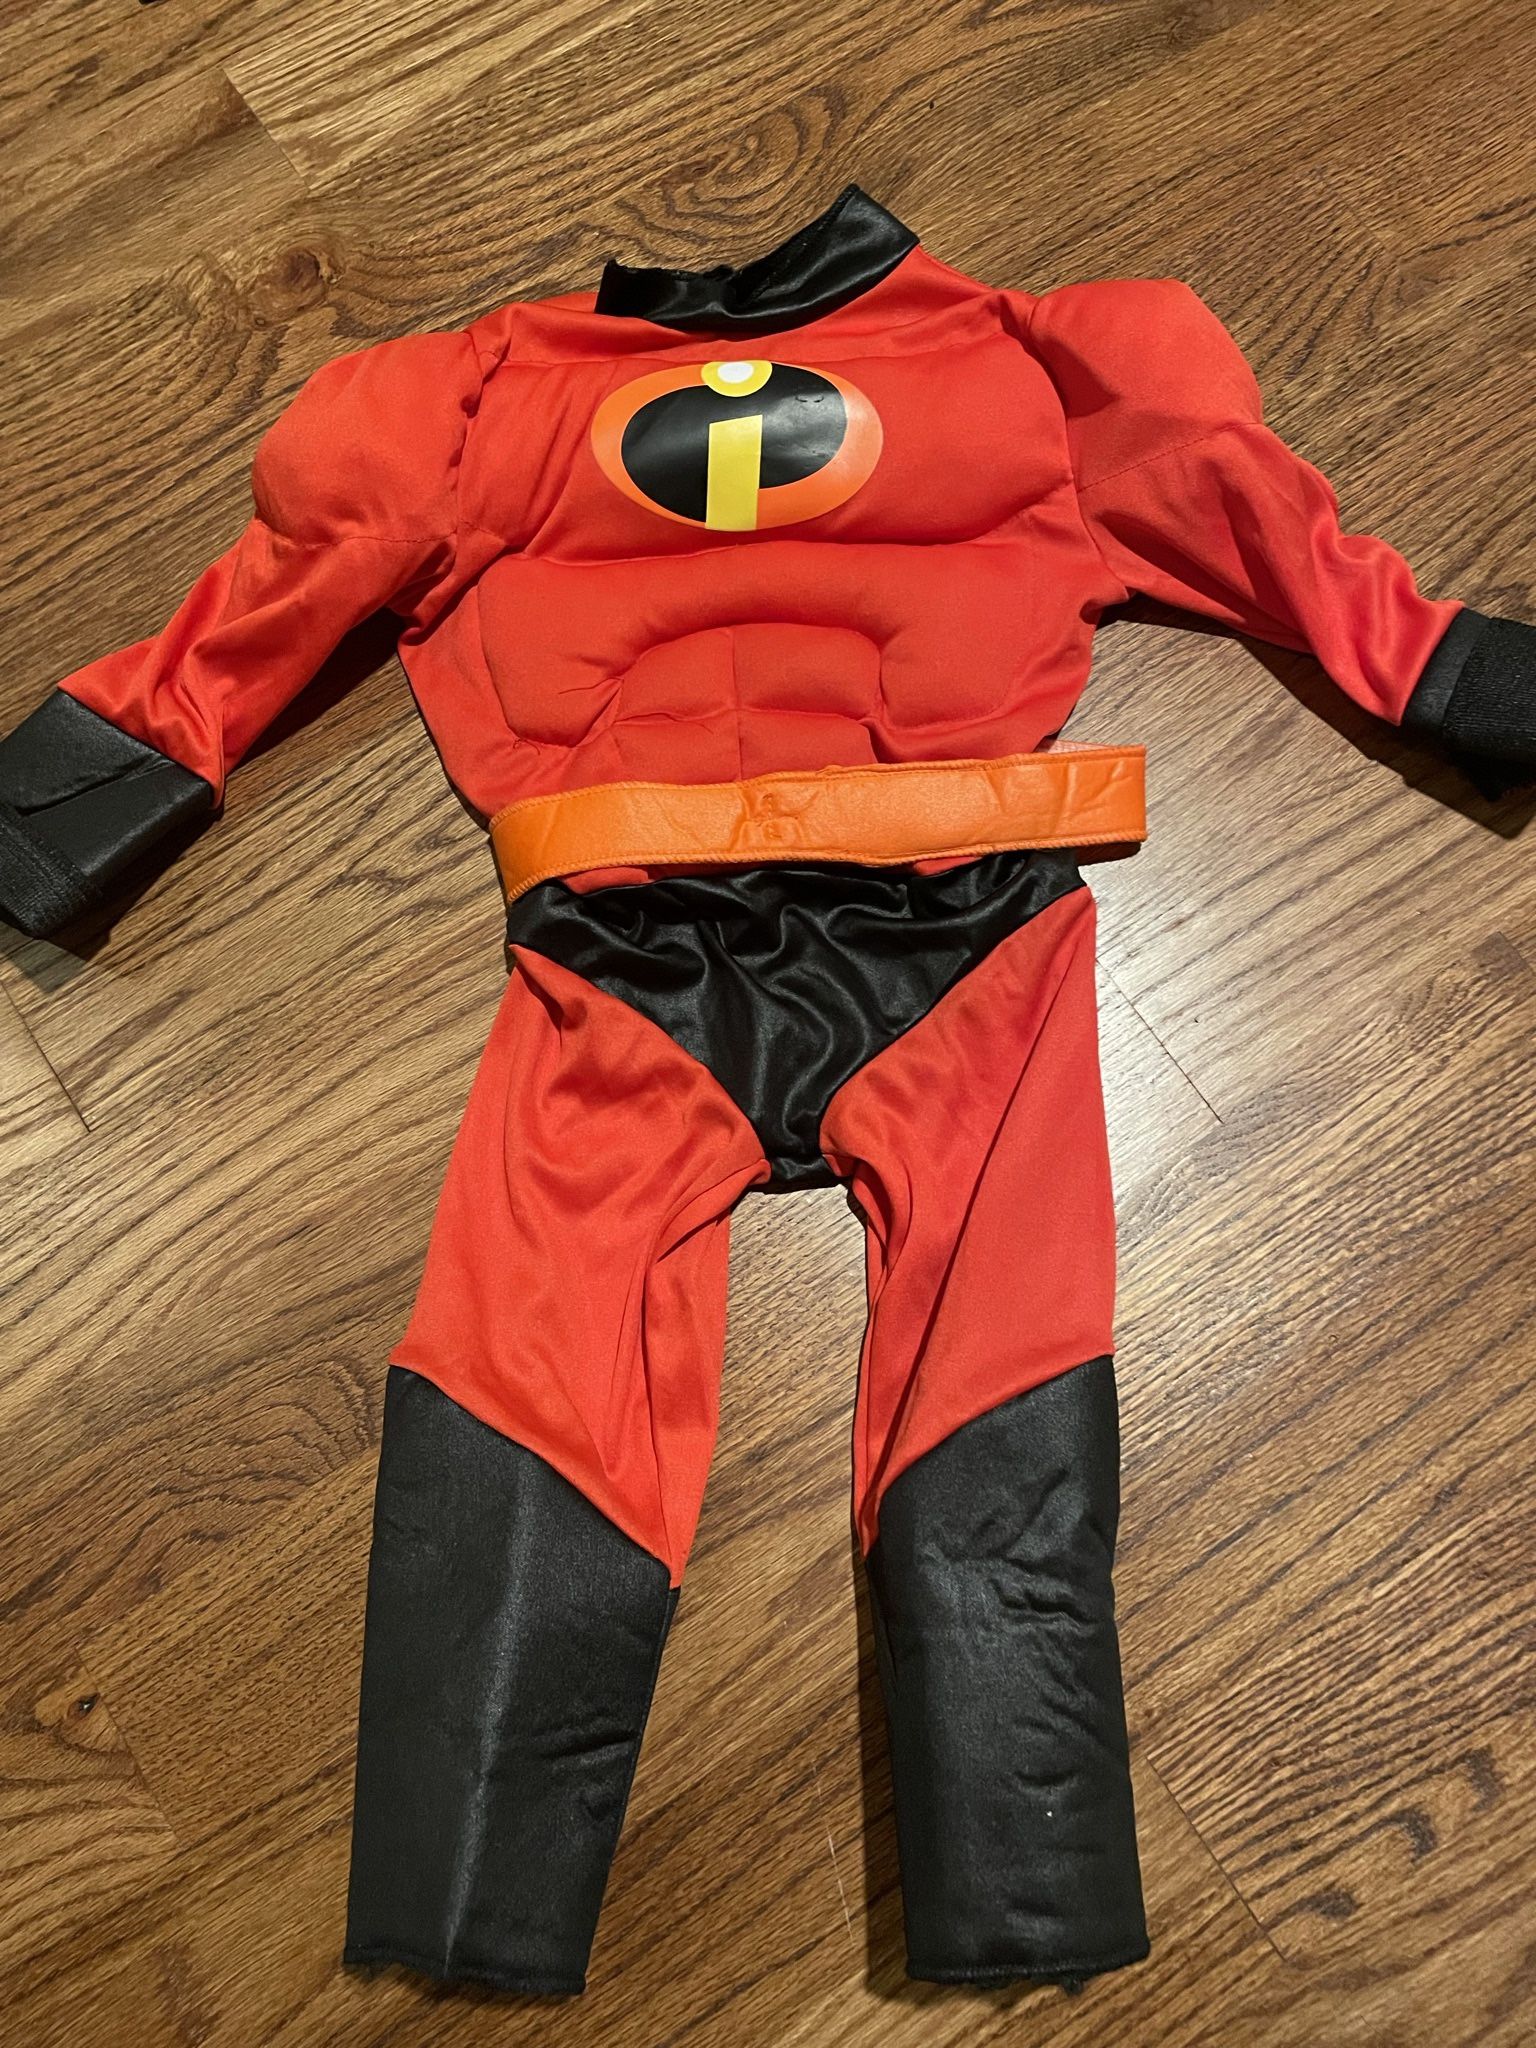 Incredibles Dash Muscle Halloween Costume (2T)